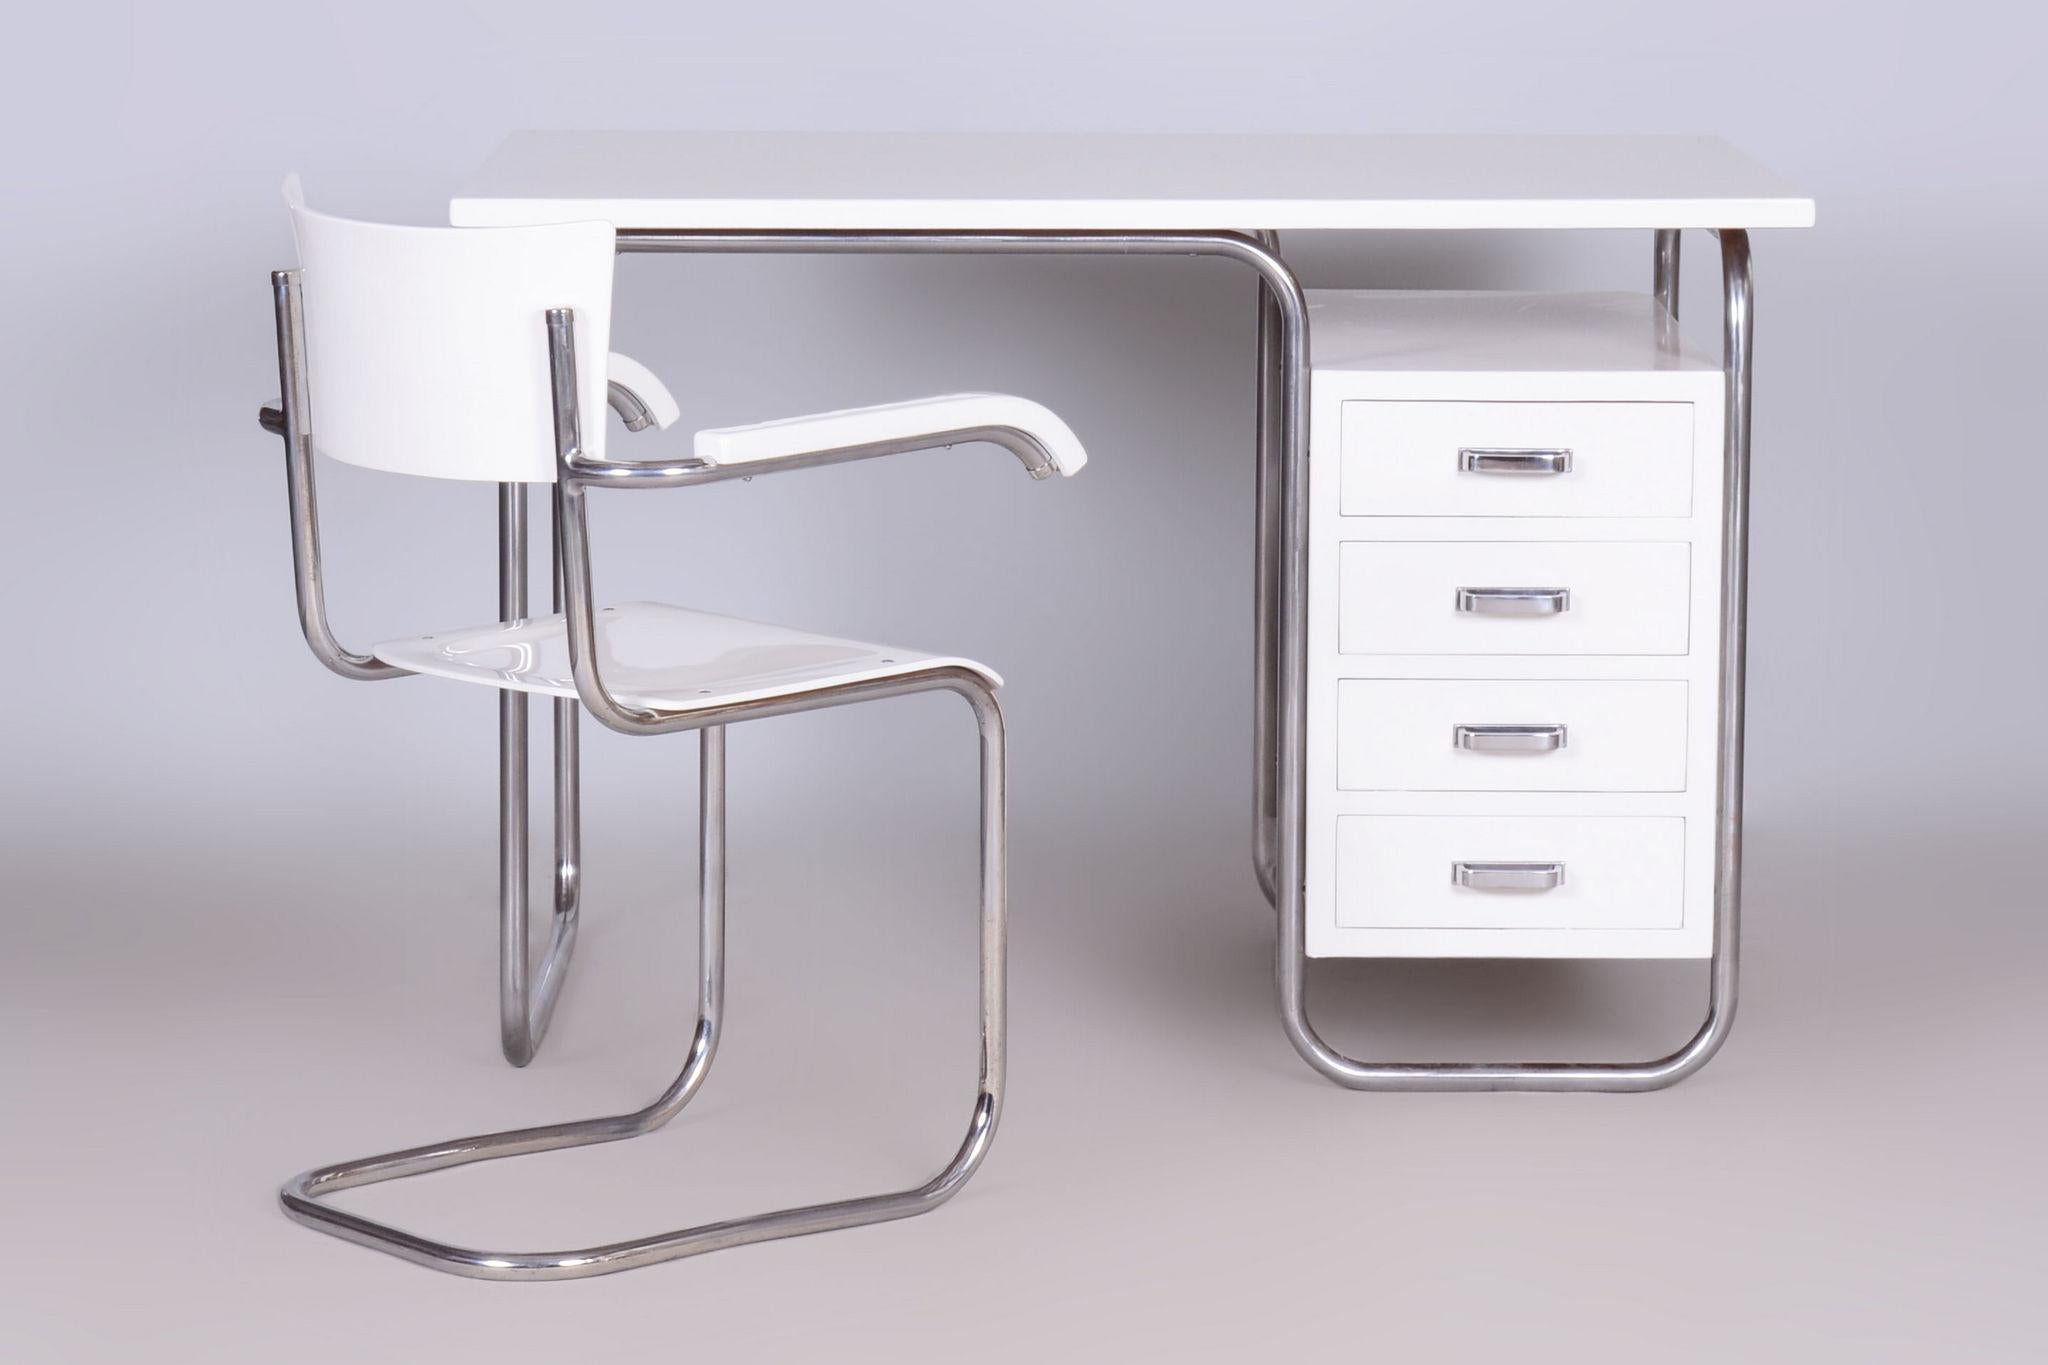 Mid-20th Century Restored Bauhaus Writing Desk With Chair, Chrome, Steel, Wood, Czech, 1930s For Sale